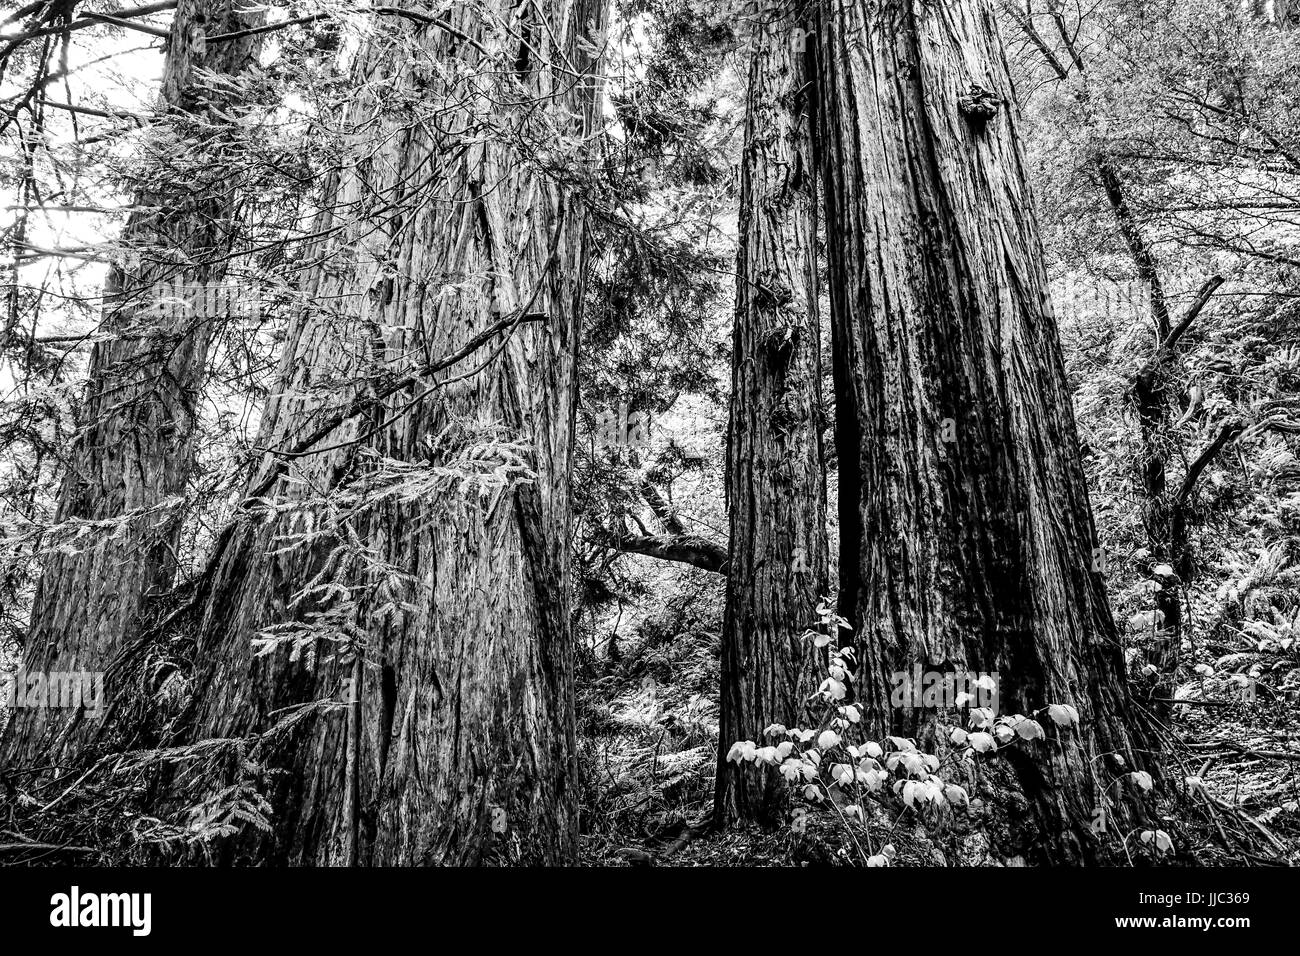 Redwood Forest with giant red cedar trees Stock Photo